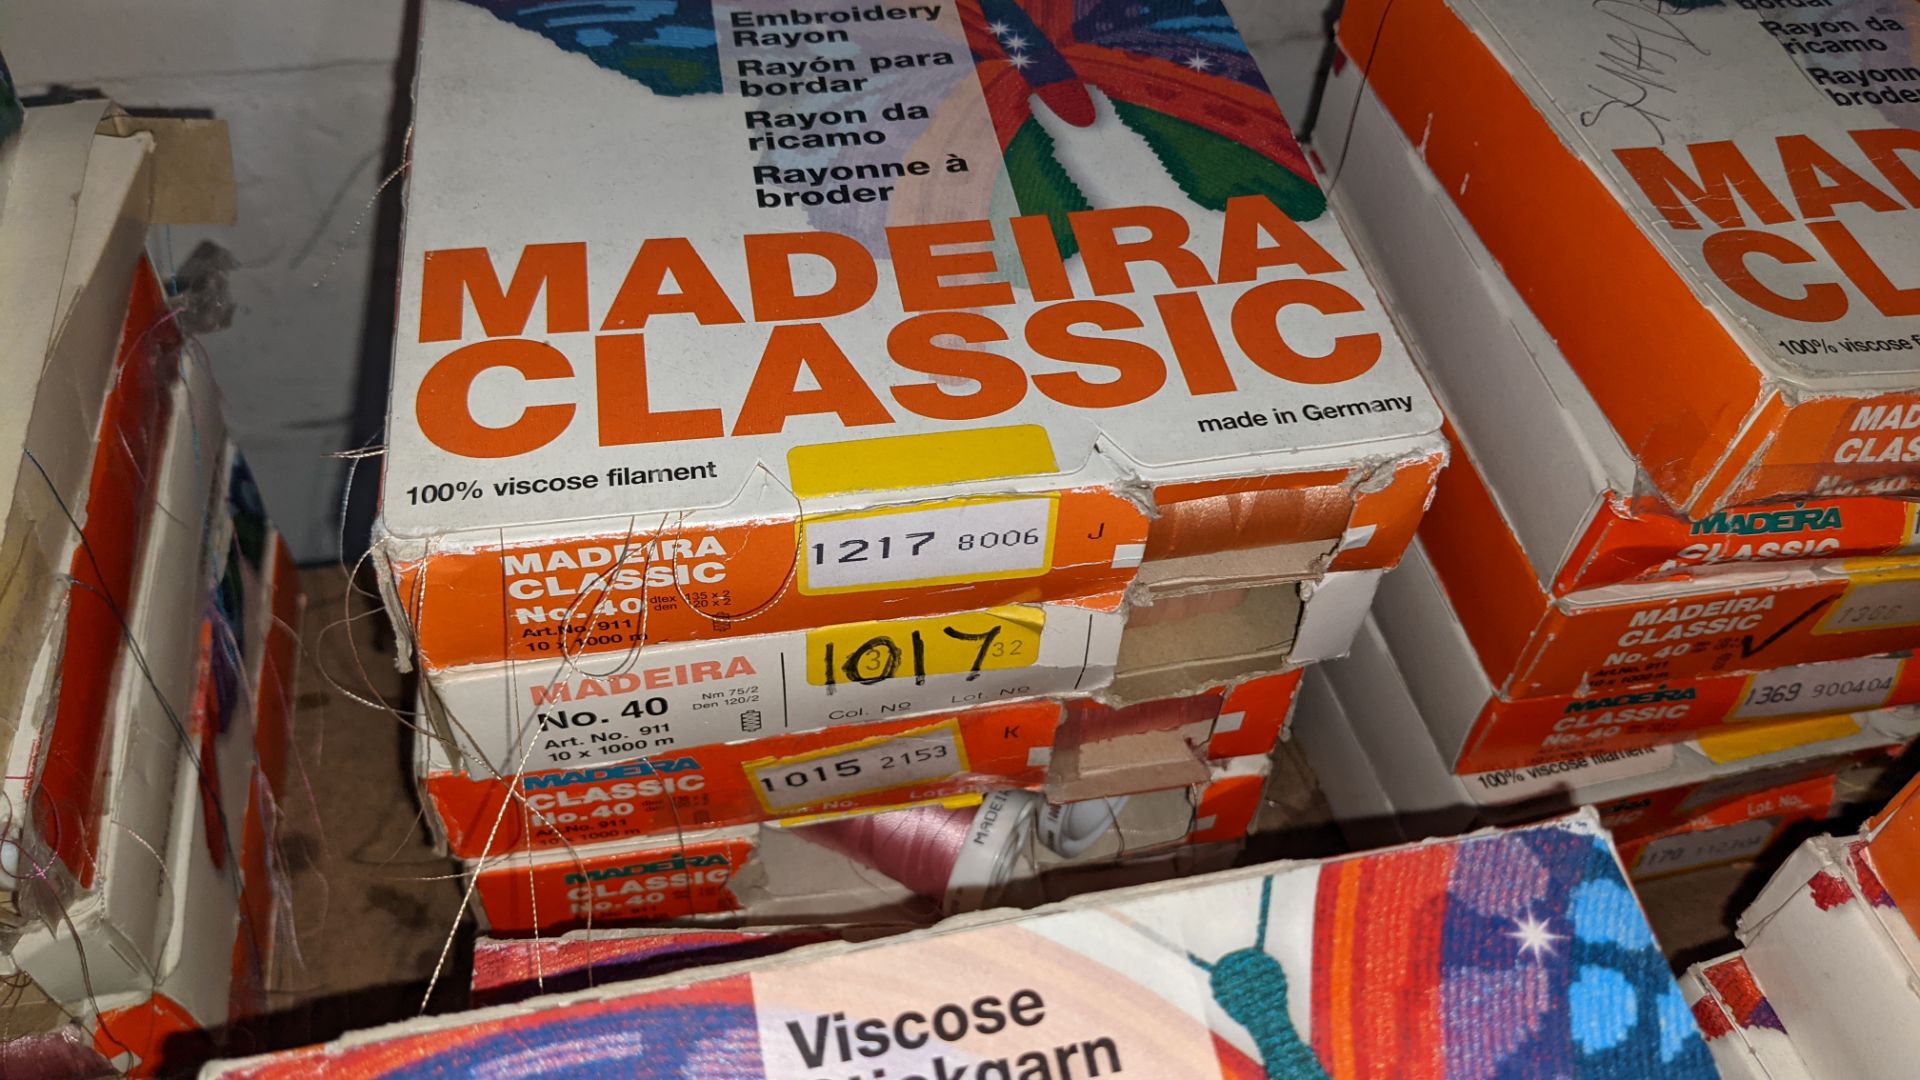 18 assorted boxes of Madeira Classic No. 40 embroidery rayon thread - Image 5 of 8